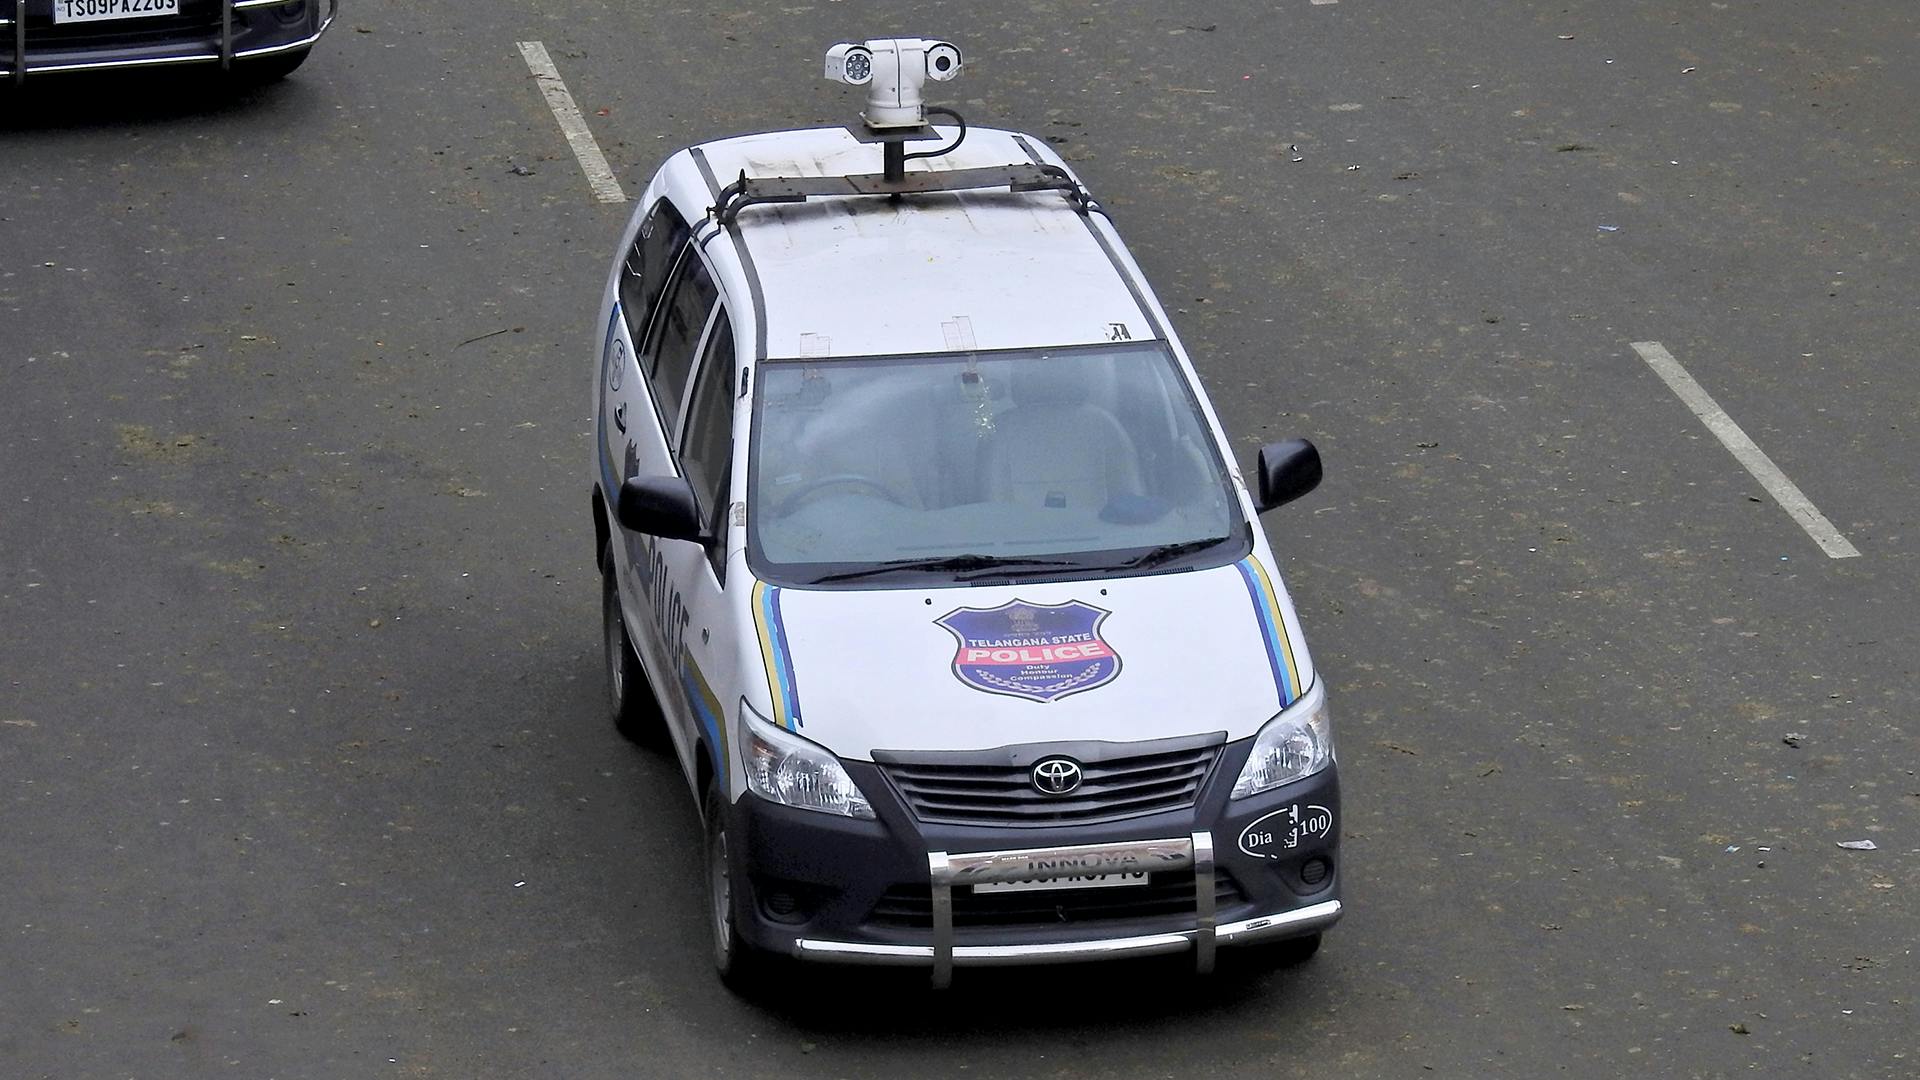 Police car mounted with CCTV cameras following God Ganesha Idol immersion festival procession, for law and order control on September 12,2019 in Hyderabad